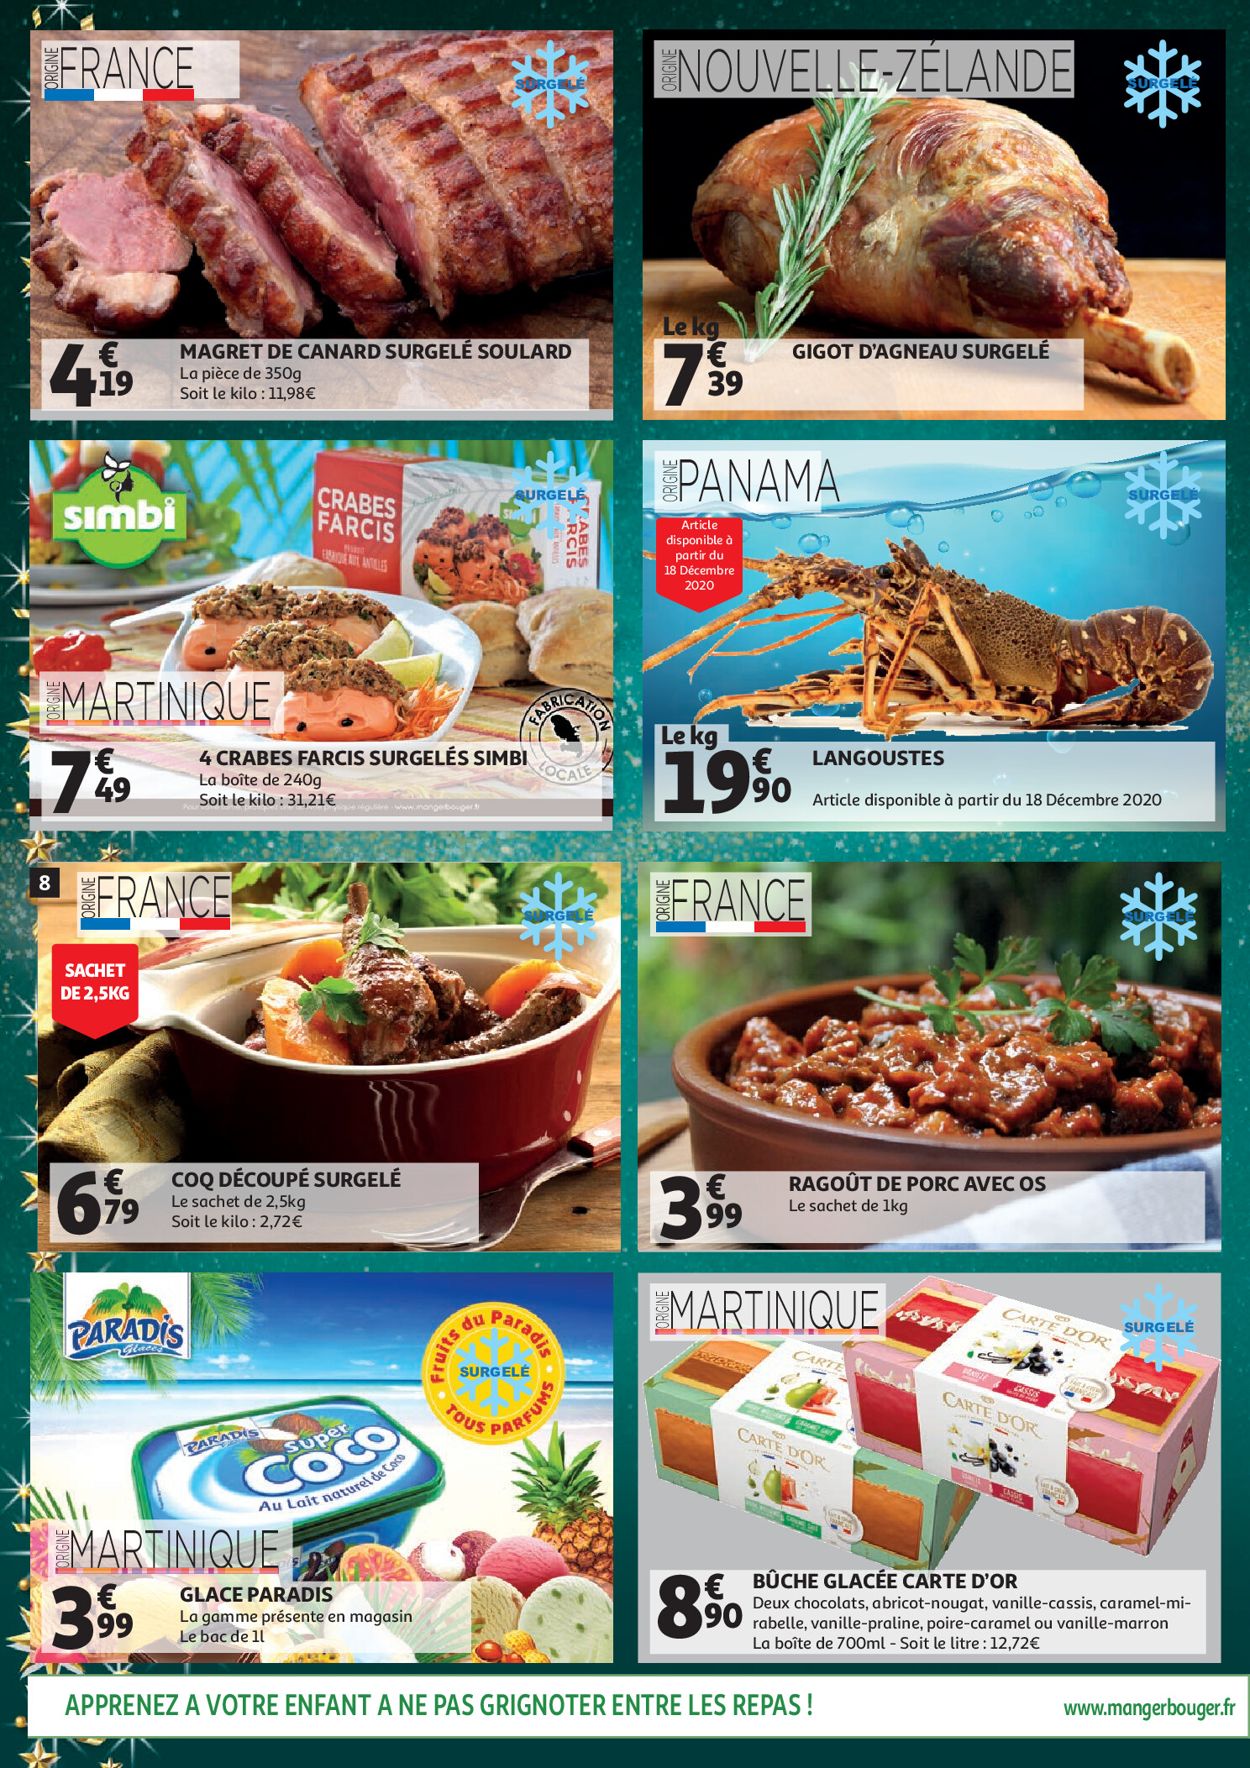 Simply Market Catalogue - 16.12-31.01.2021 (Page 8)